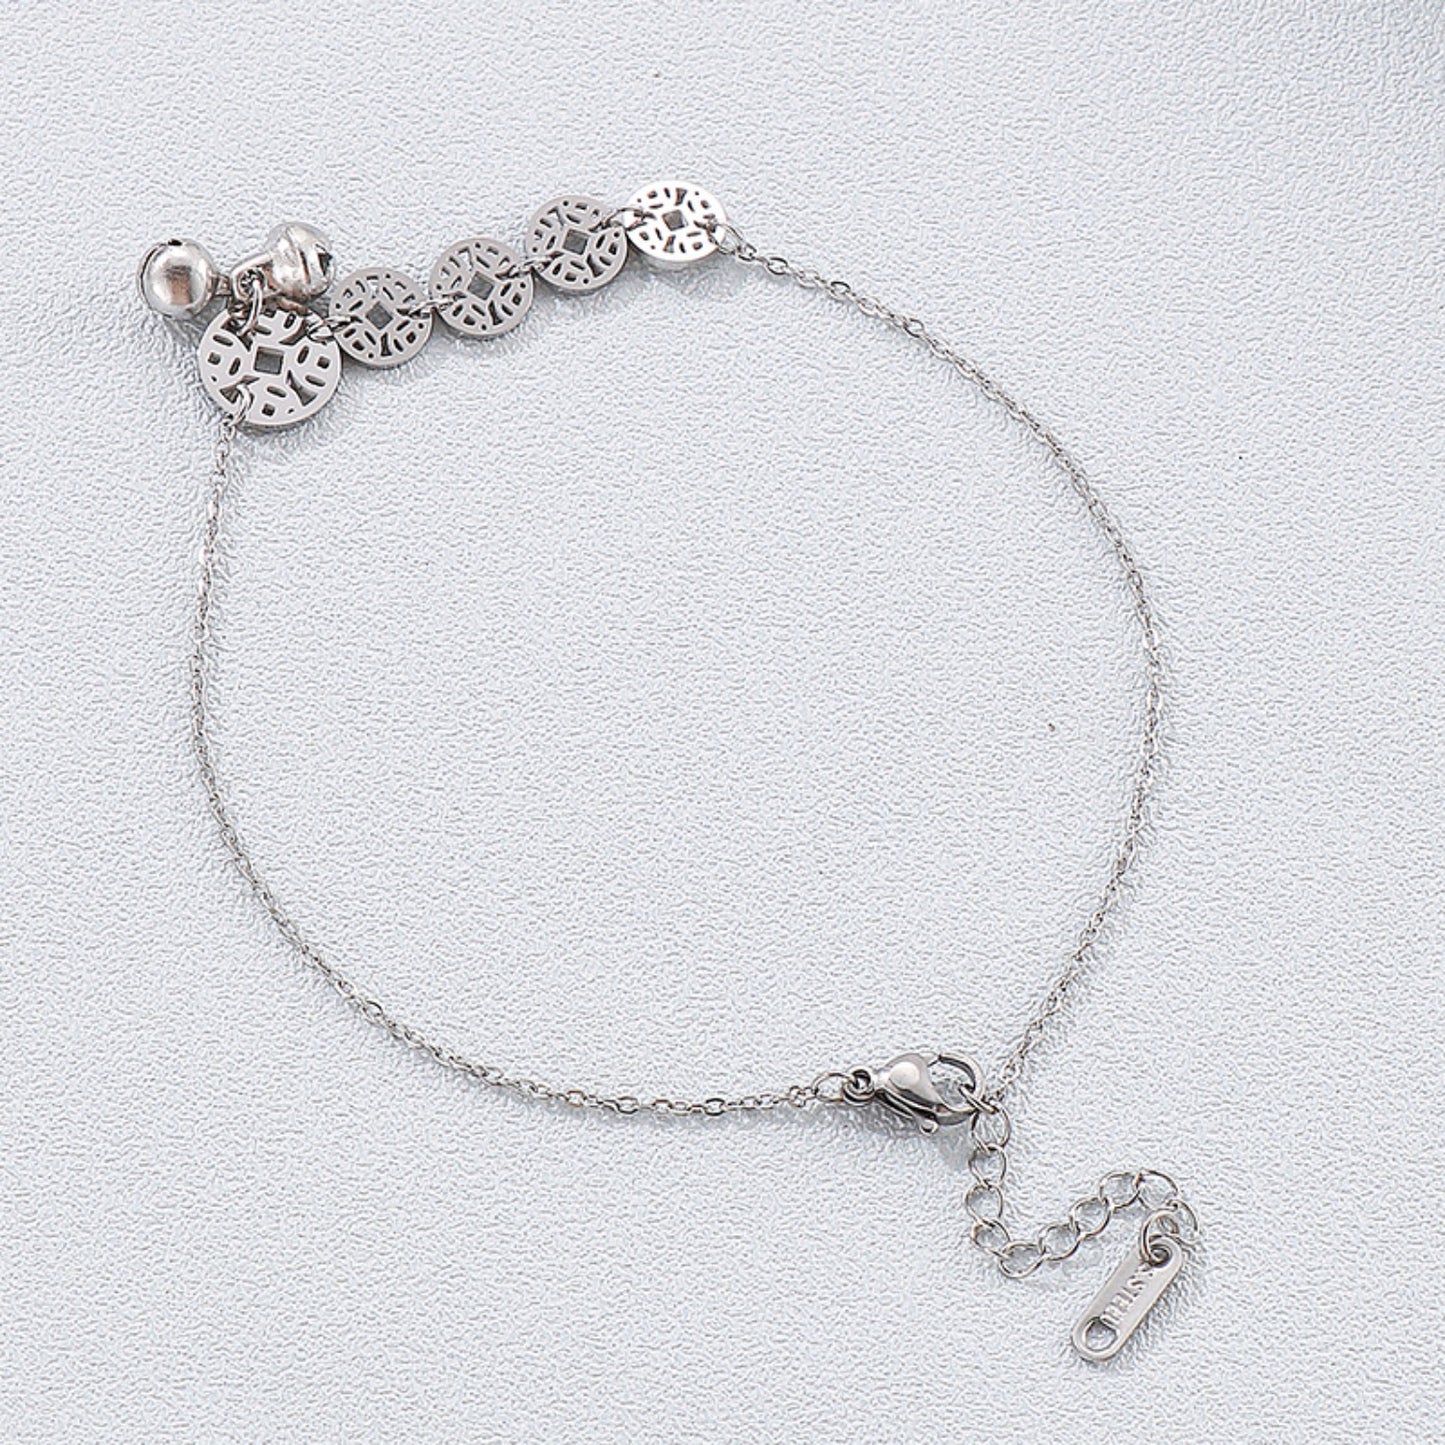 Stainless Steel Coin Shape Anklet Bracelet Silver One Size